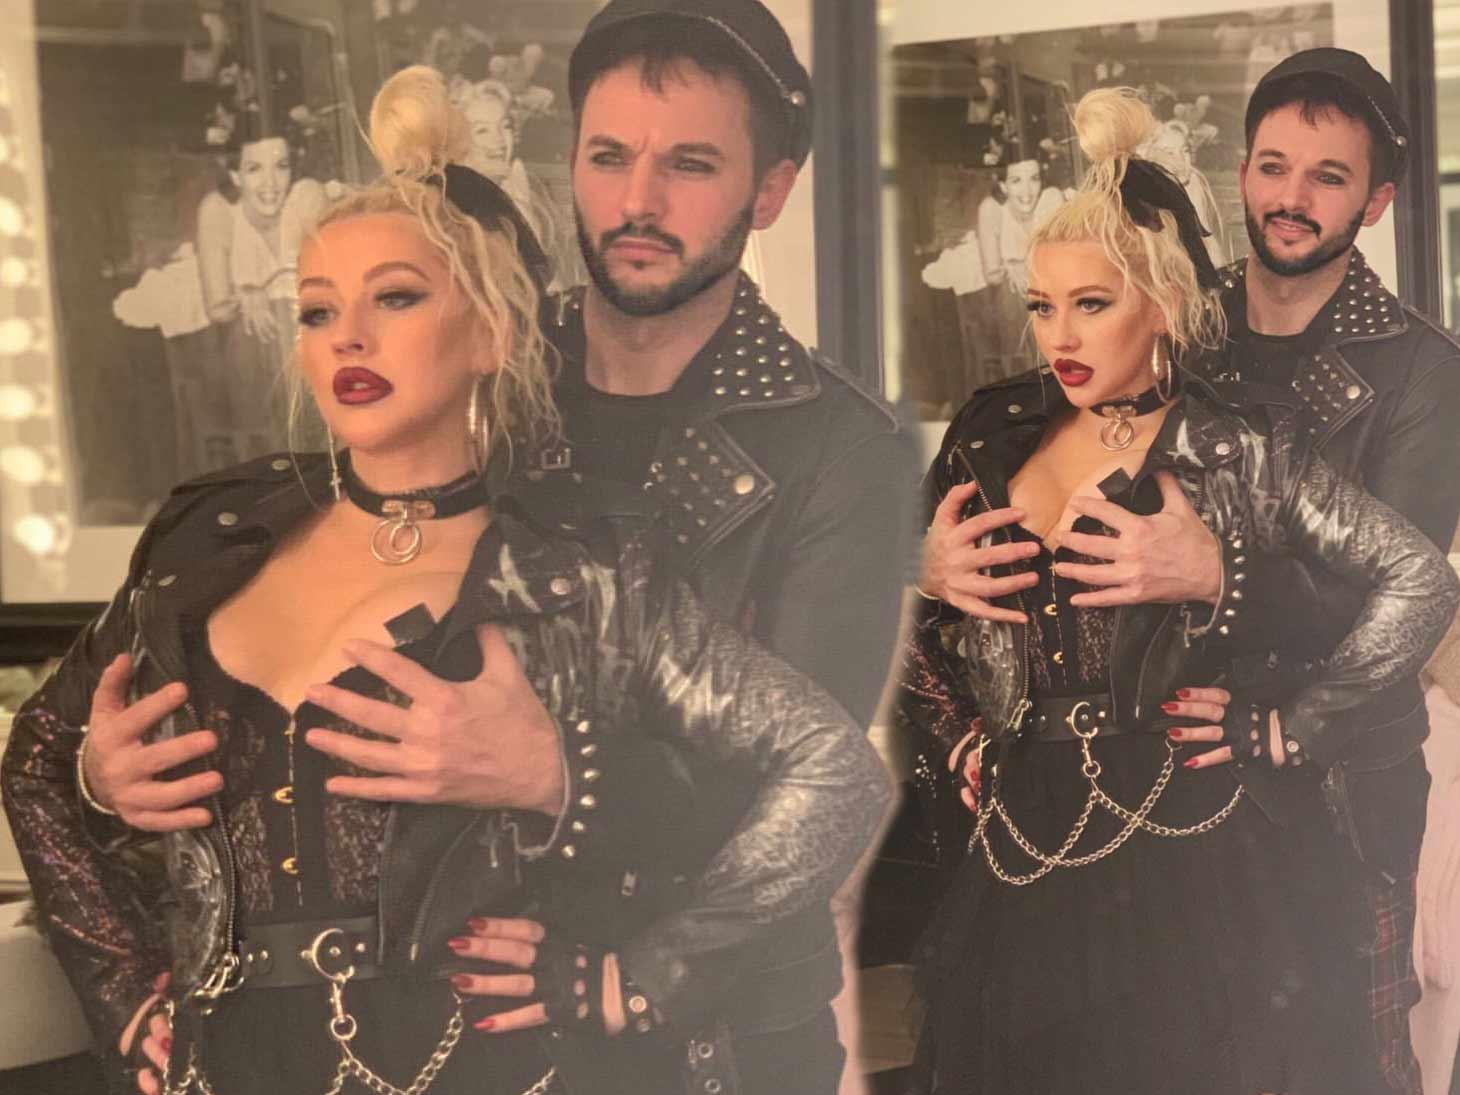 Christina Aguilera Gets ‘Dirrty’ With Handsy Husband on 38th Birthday